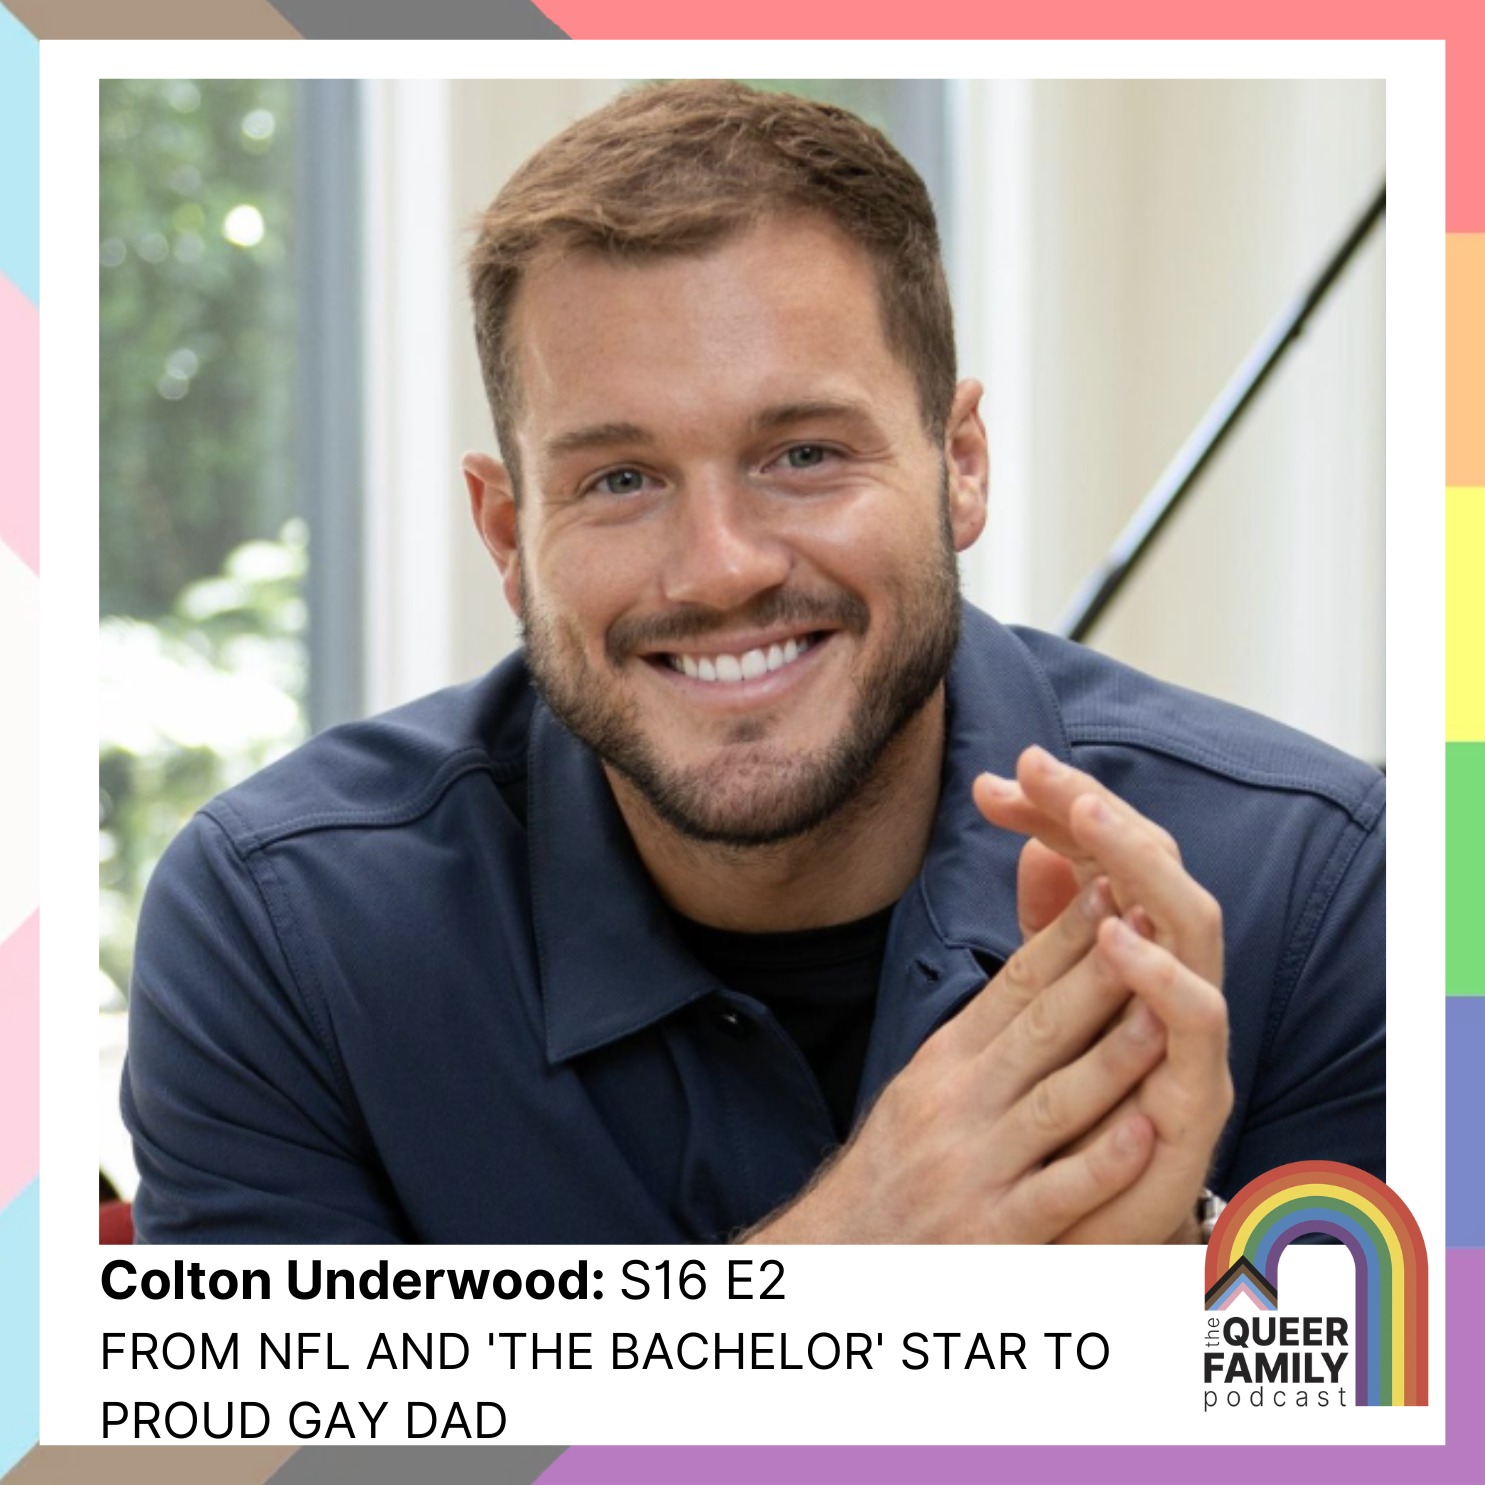 Colton Underwood: From NFL and 'The Bachelor' Star to Proud Gay Dad